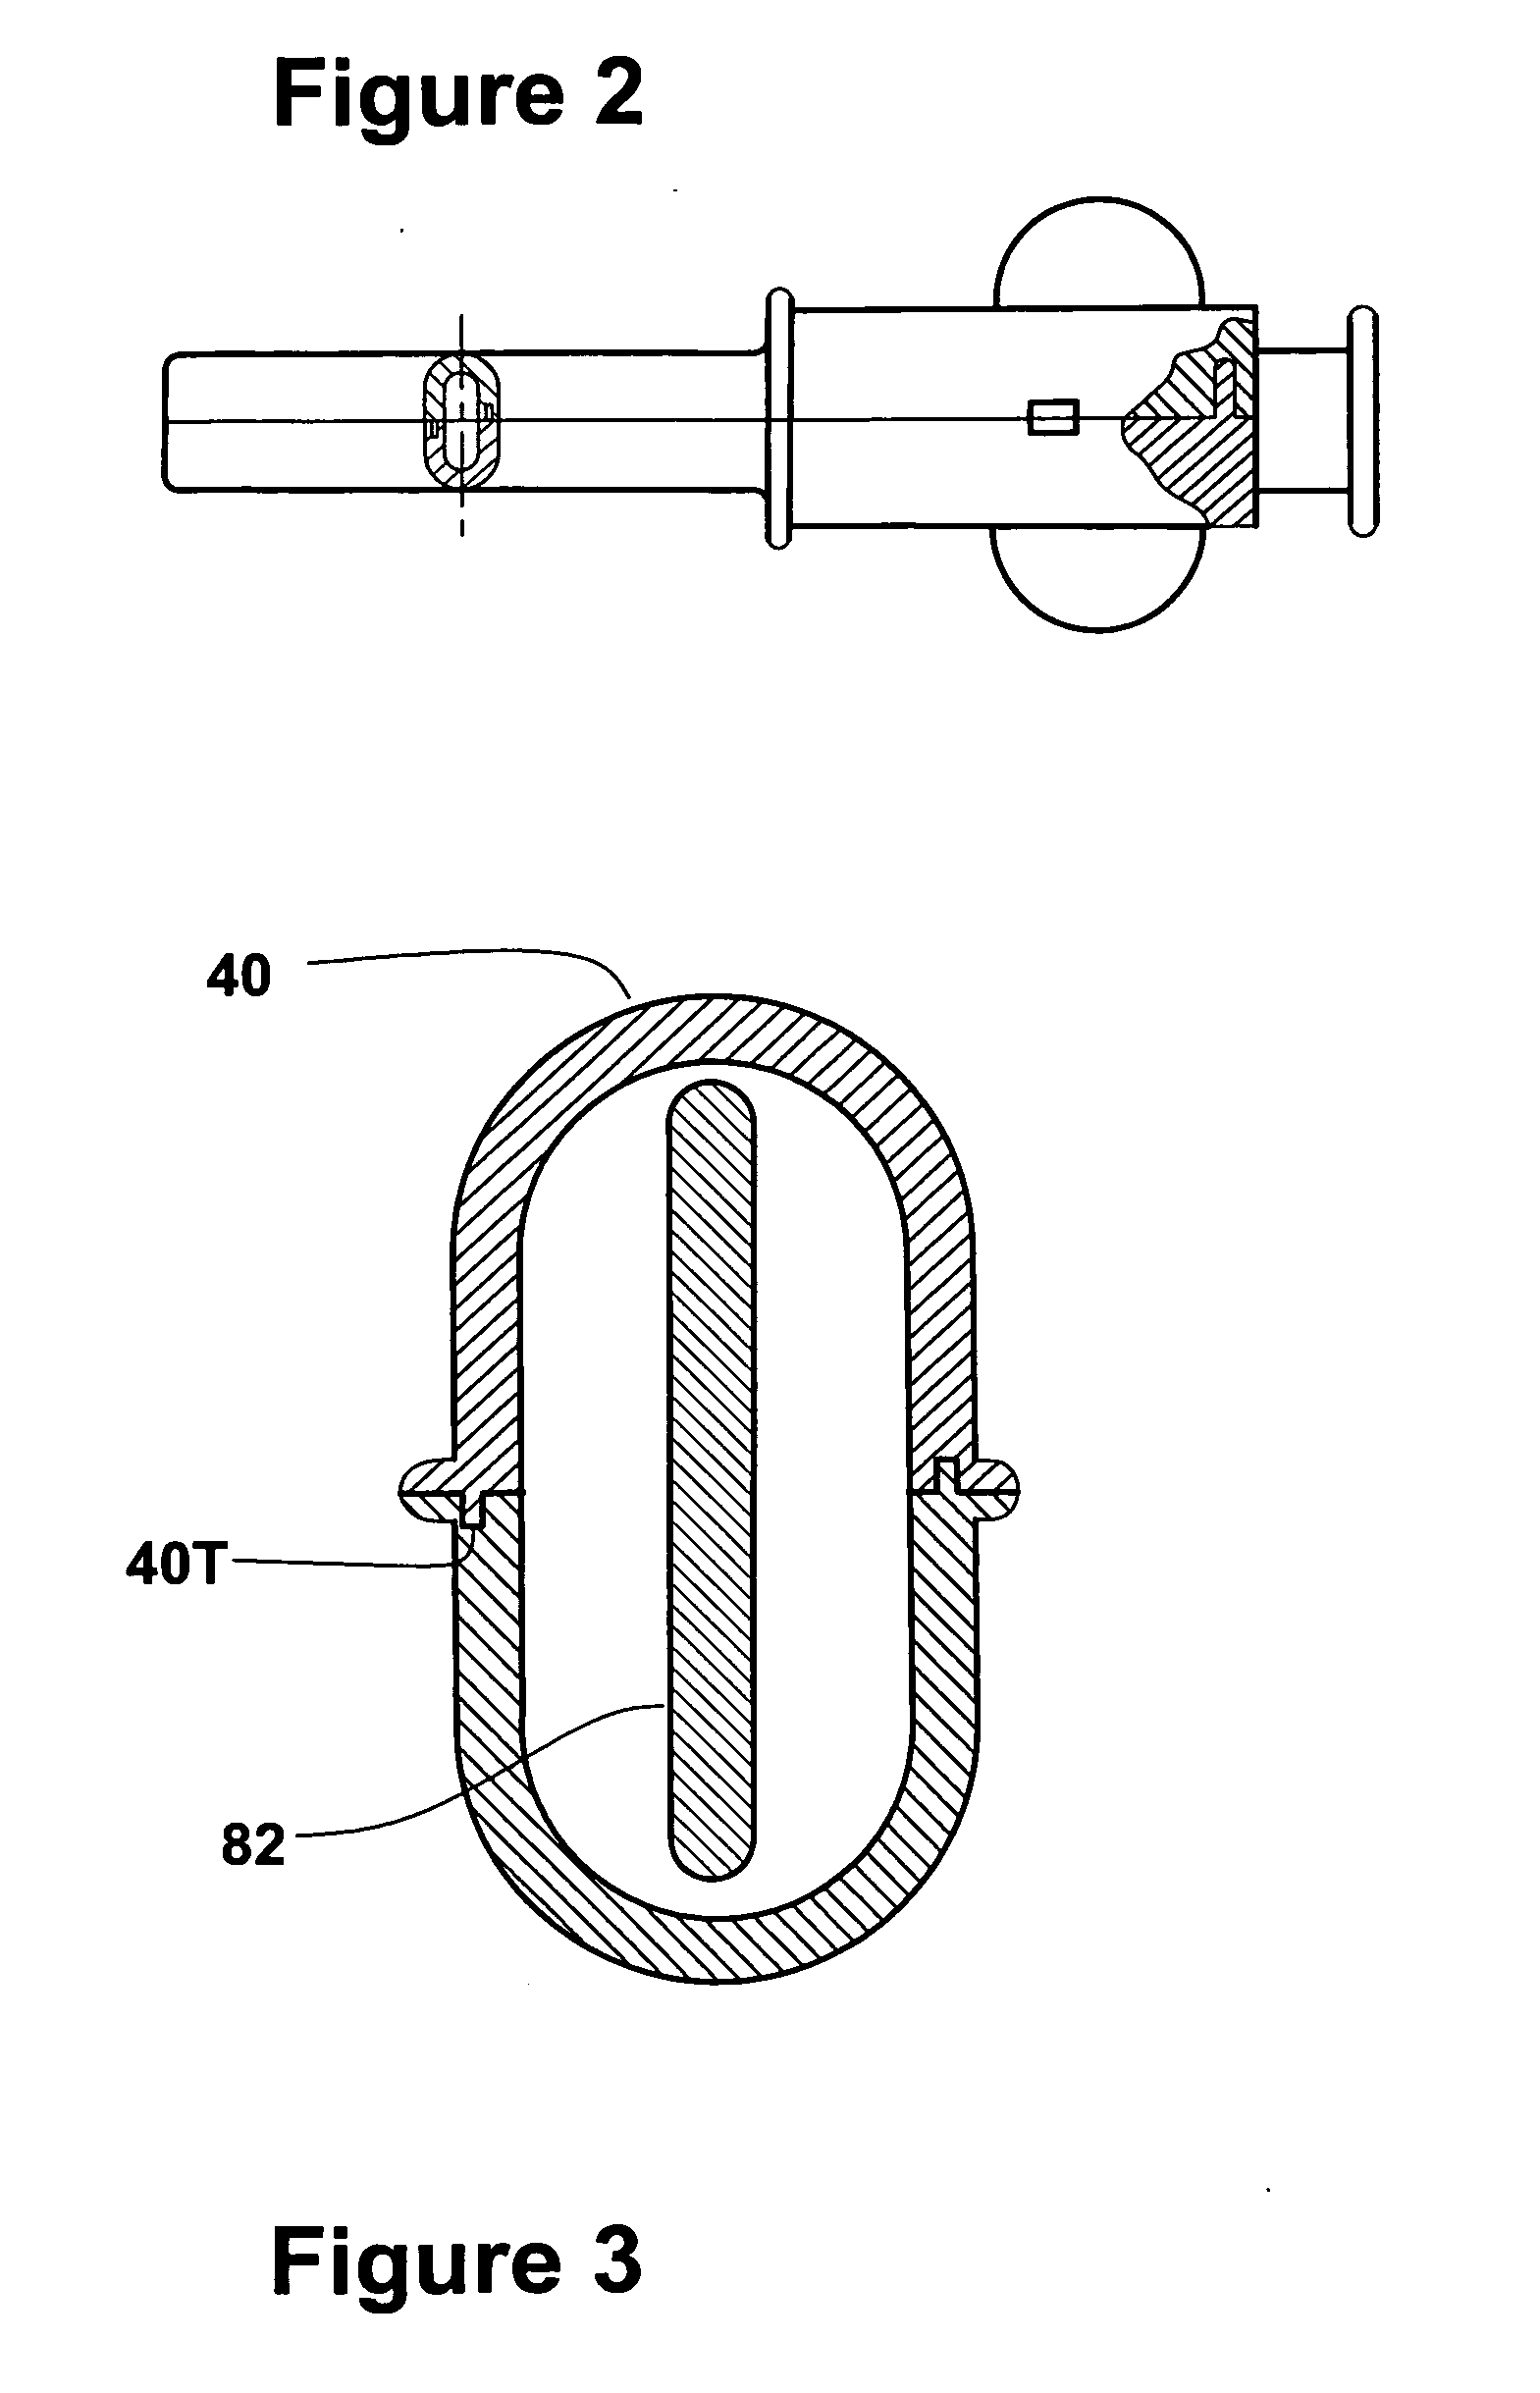 Device for removing a lodged mass